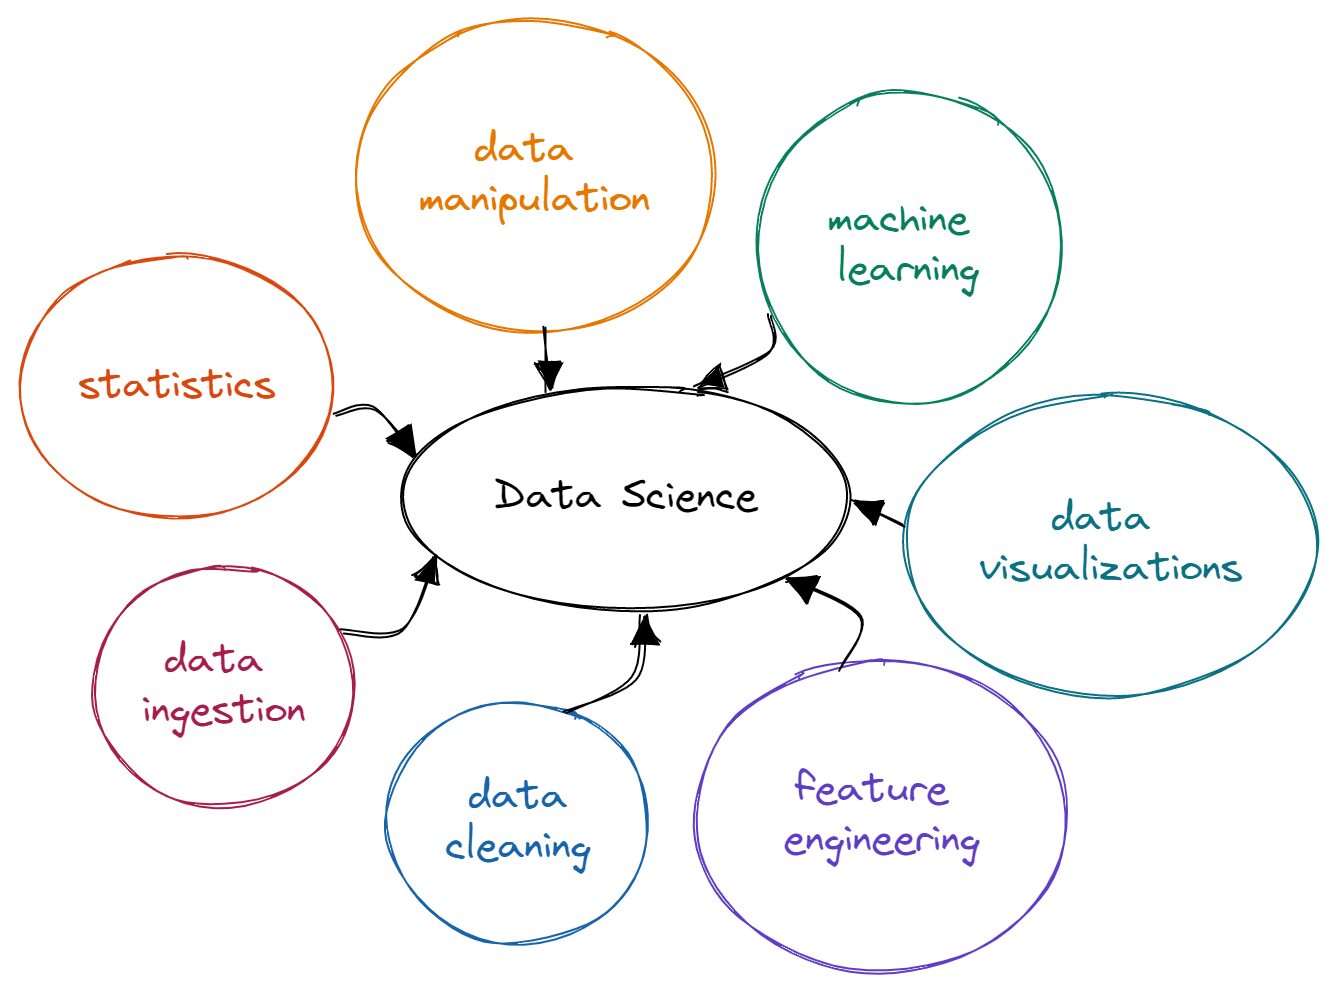 How to get hired as a data scientist in the GPT-4 era